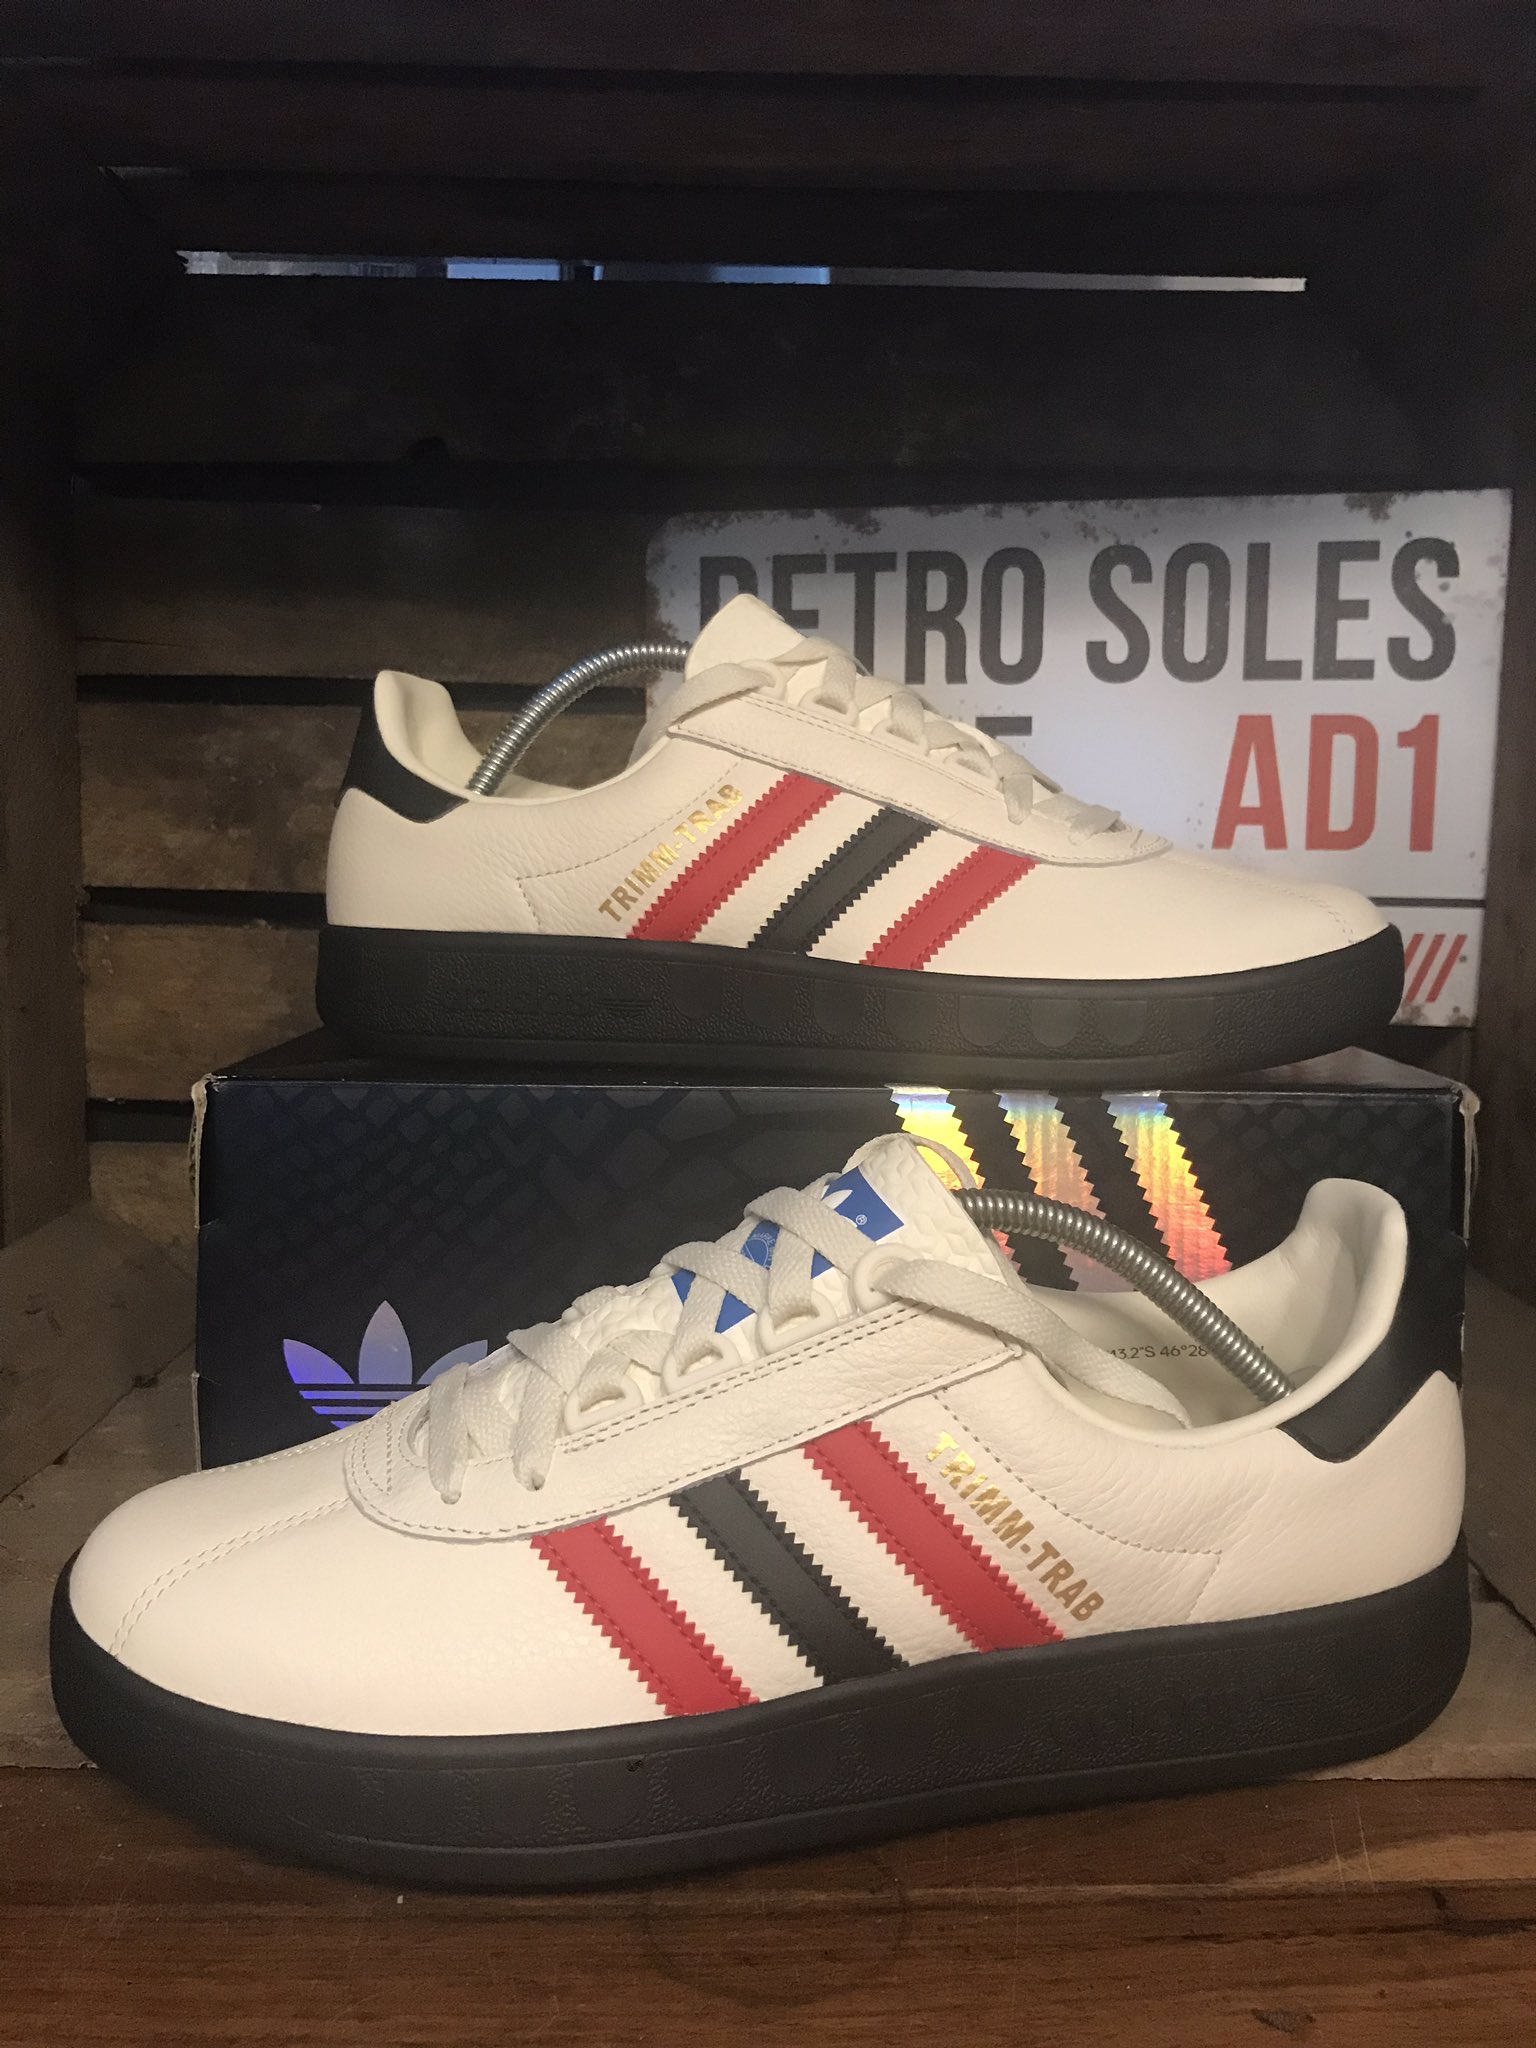 Mary Sæt tøj væk retfærdig Retro Soles on Twitter: "For Sale:- #Adidas #Trimm #Trab #Rivalry #Paulista  UK 9 Condition:- Brand New In Box £ 85 DELIVERED RT Appreciated DM me if  interested #adidasoriginals 👍 https://t.co/CDSKzCAKh6" / Twitter